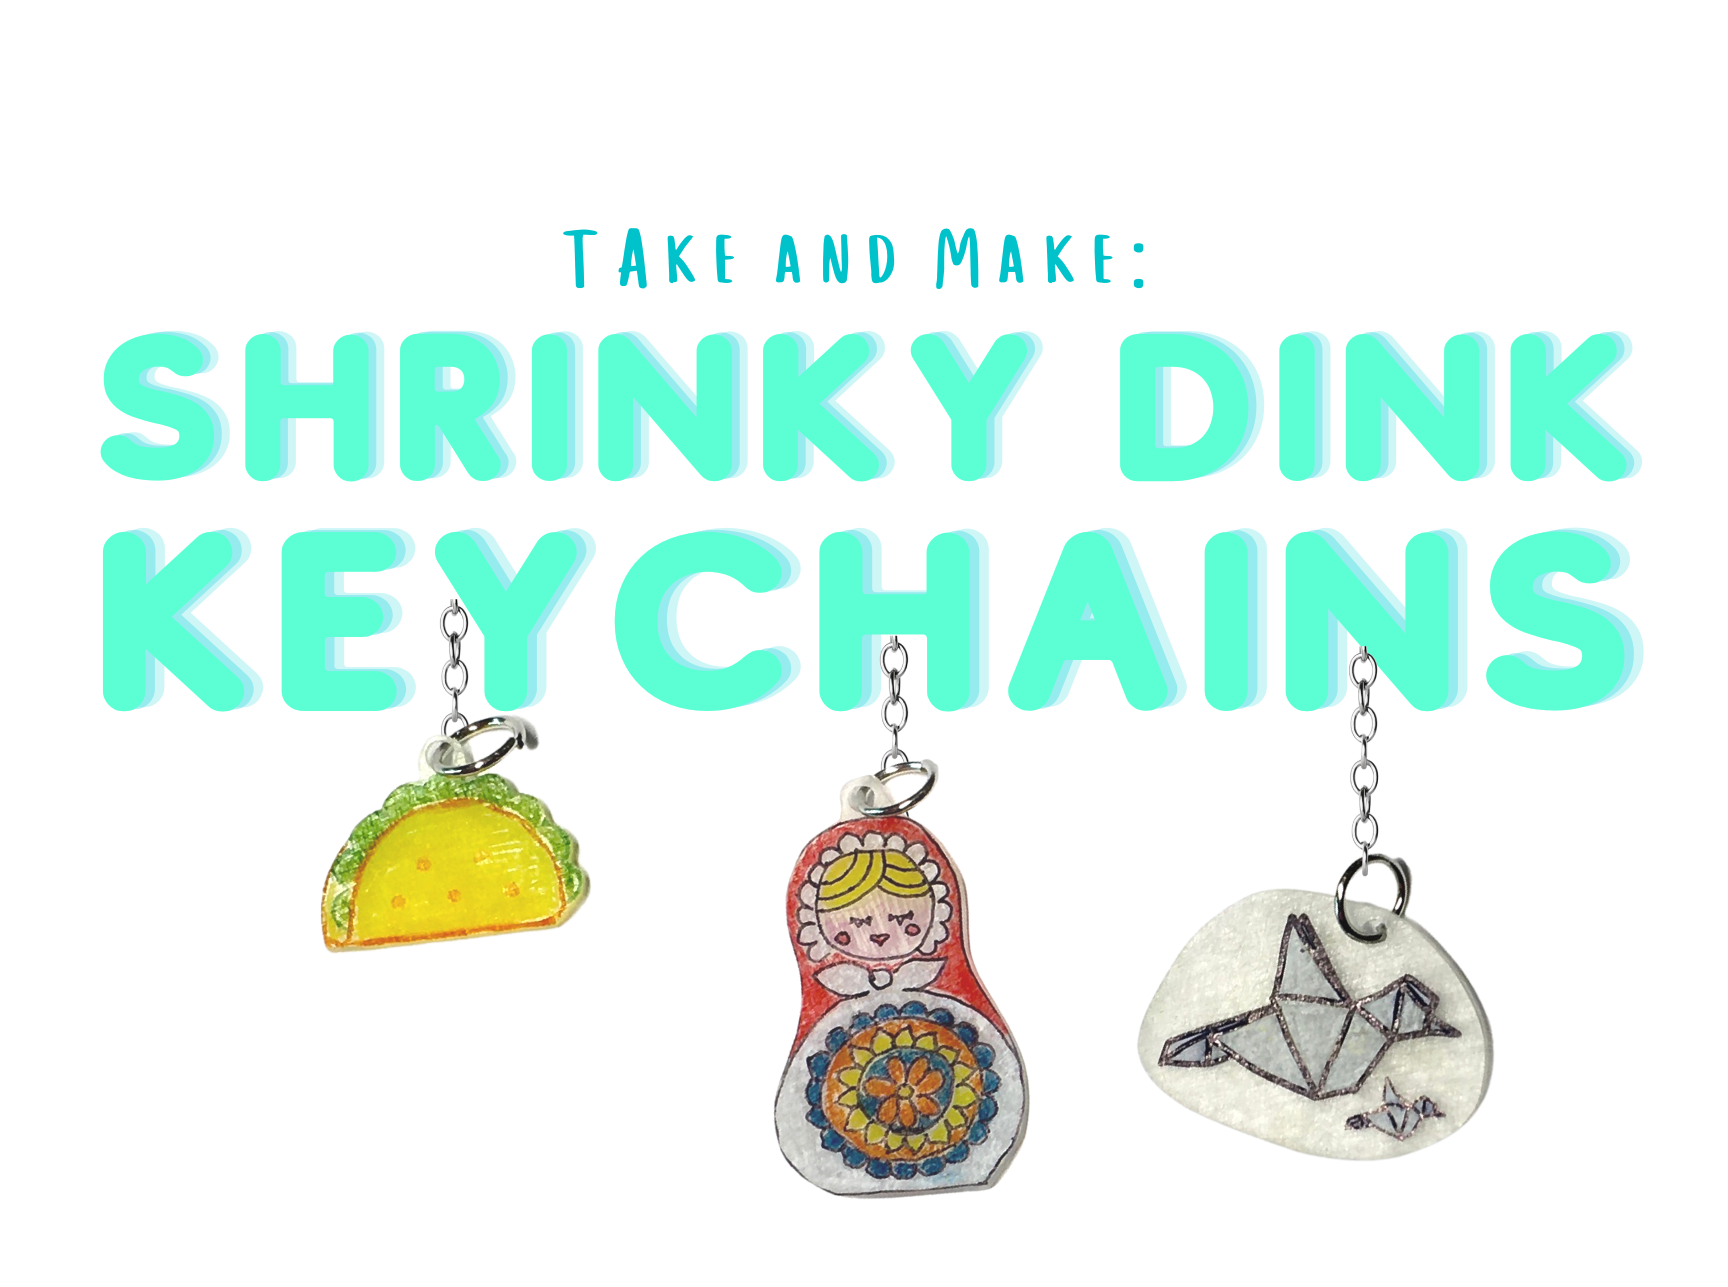 Shrinky Dink Keychains hanging from the words.